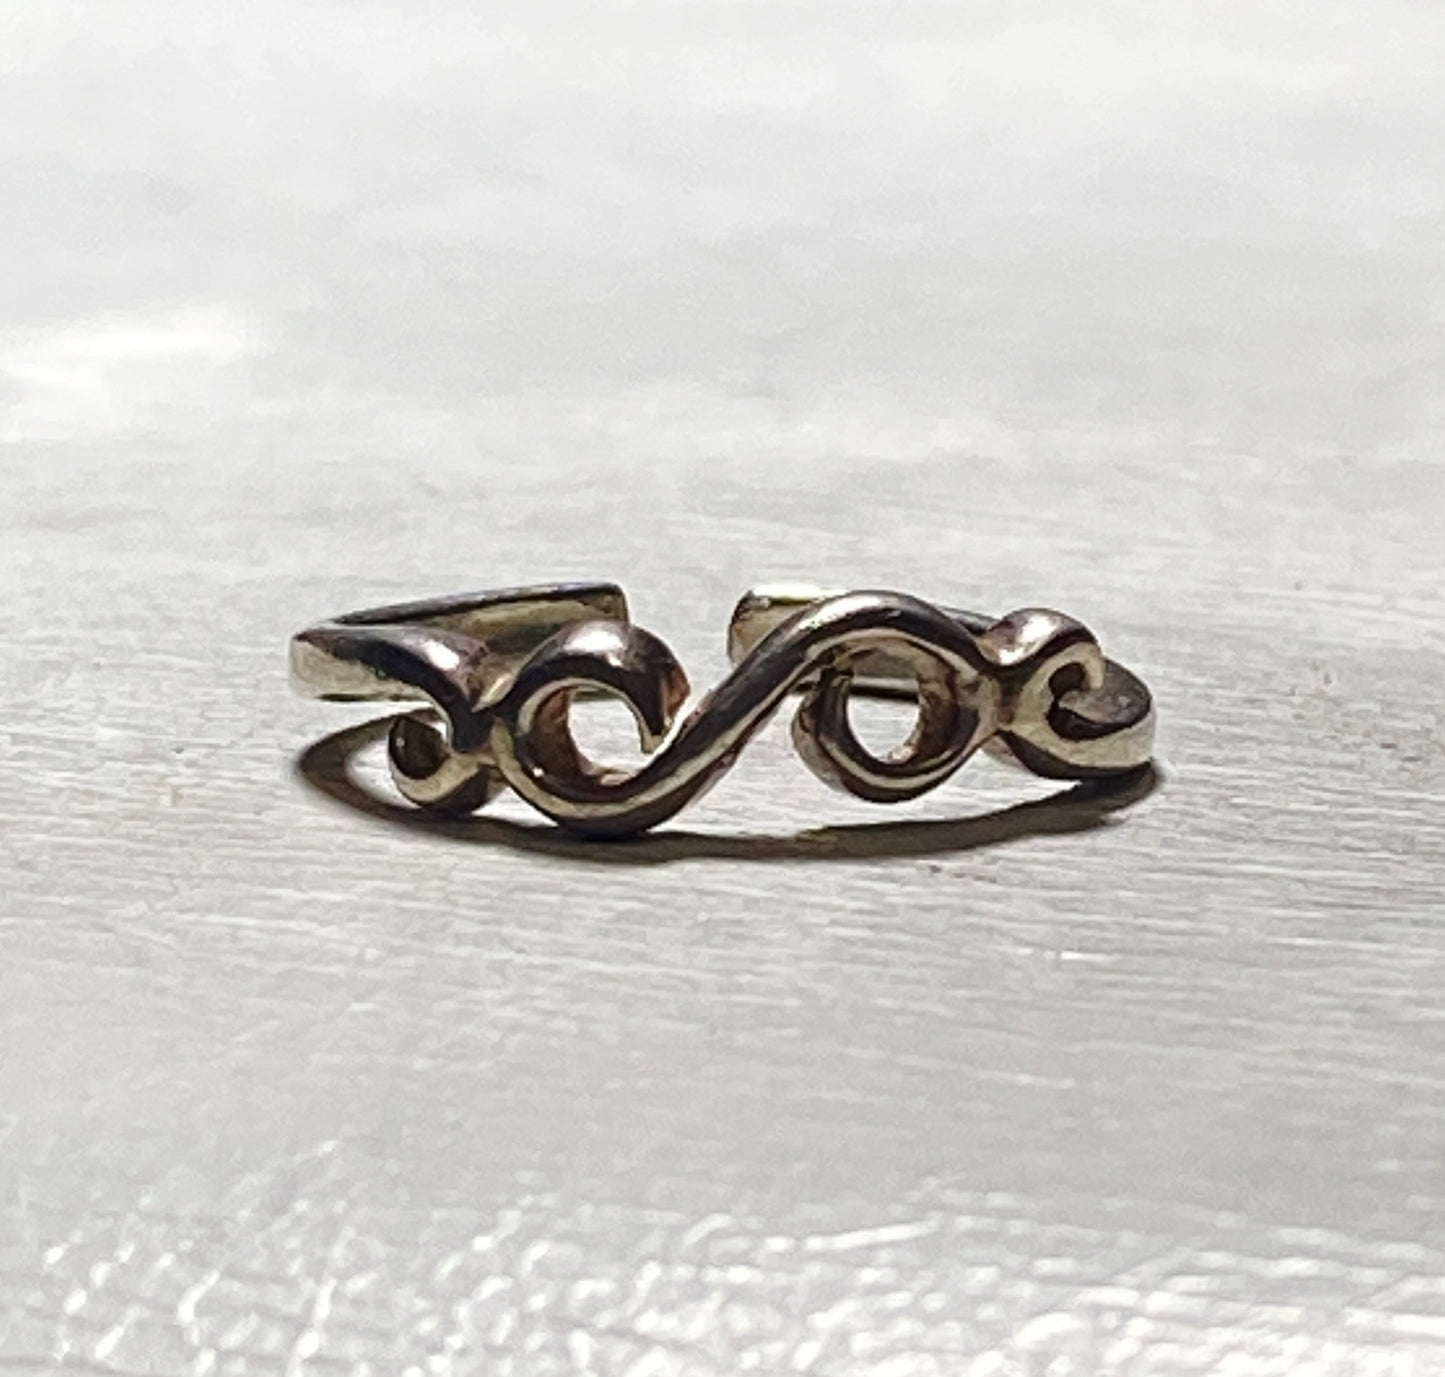 Scroll toe ring floral band sterling silver women girls